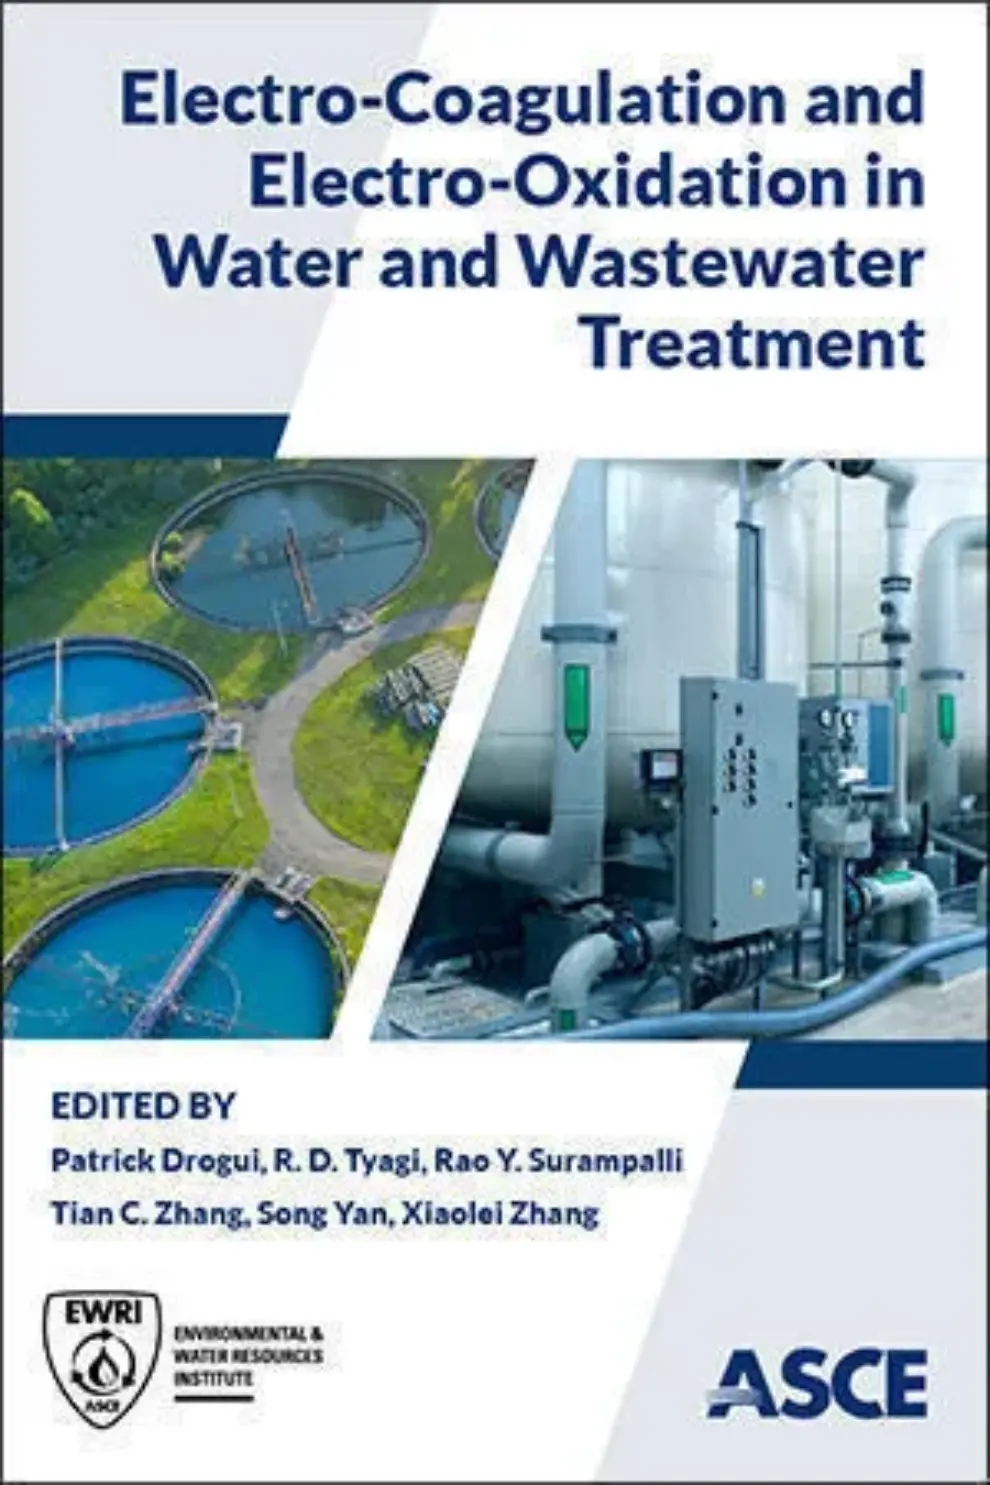 New ASCE Publication Provides an Overview and Applications for Treating Wastewater using Electro-Coagulation and Electro-Oxidation